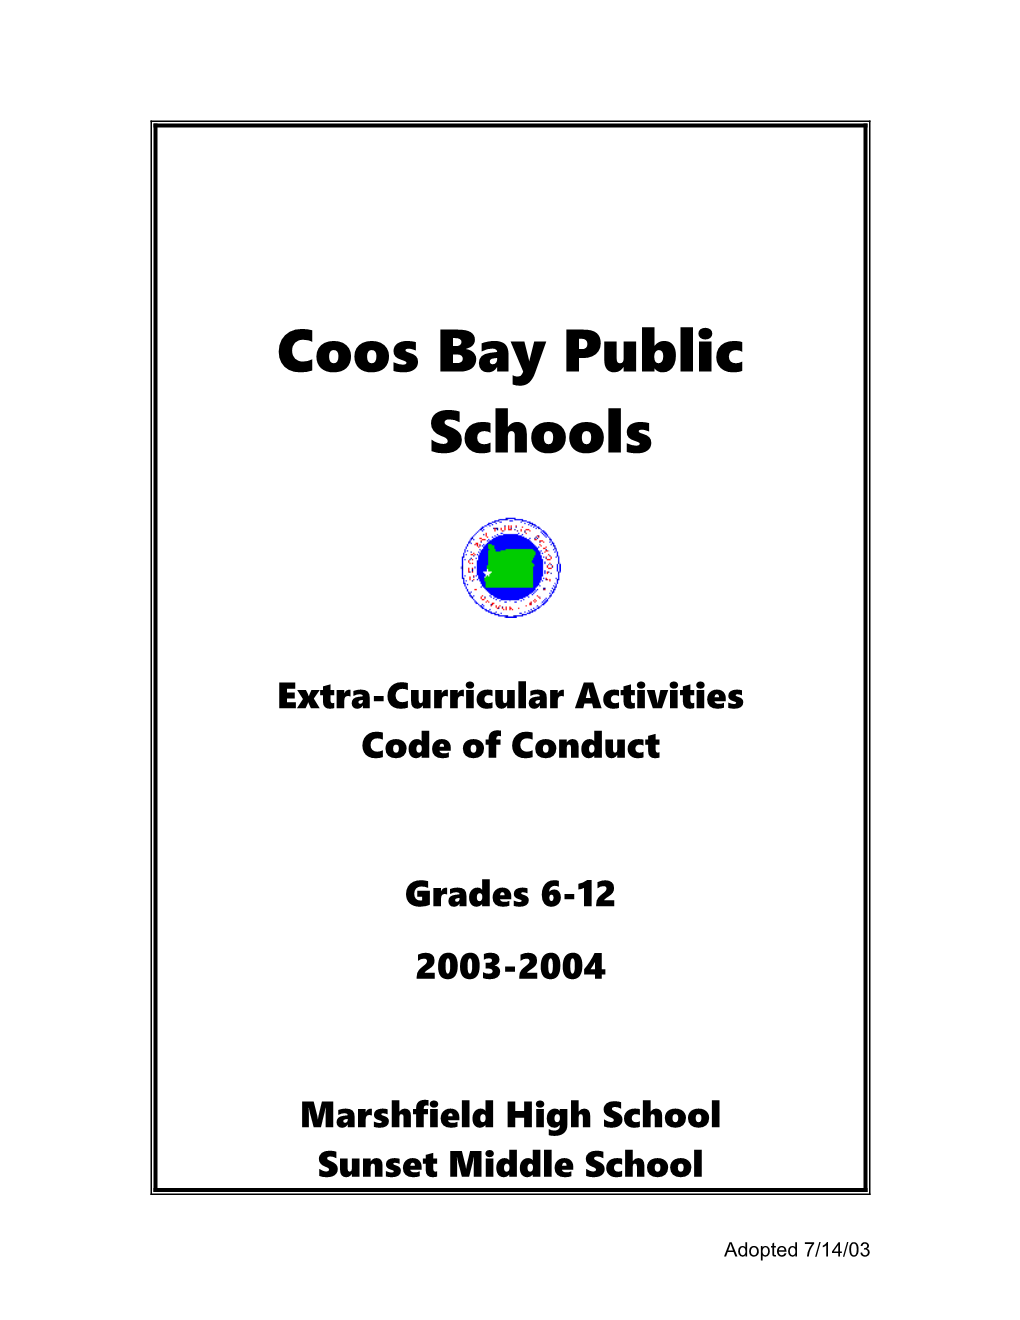 Extra-Curricular Code of Conduct